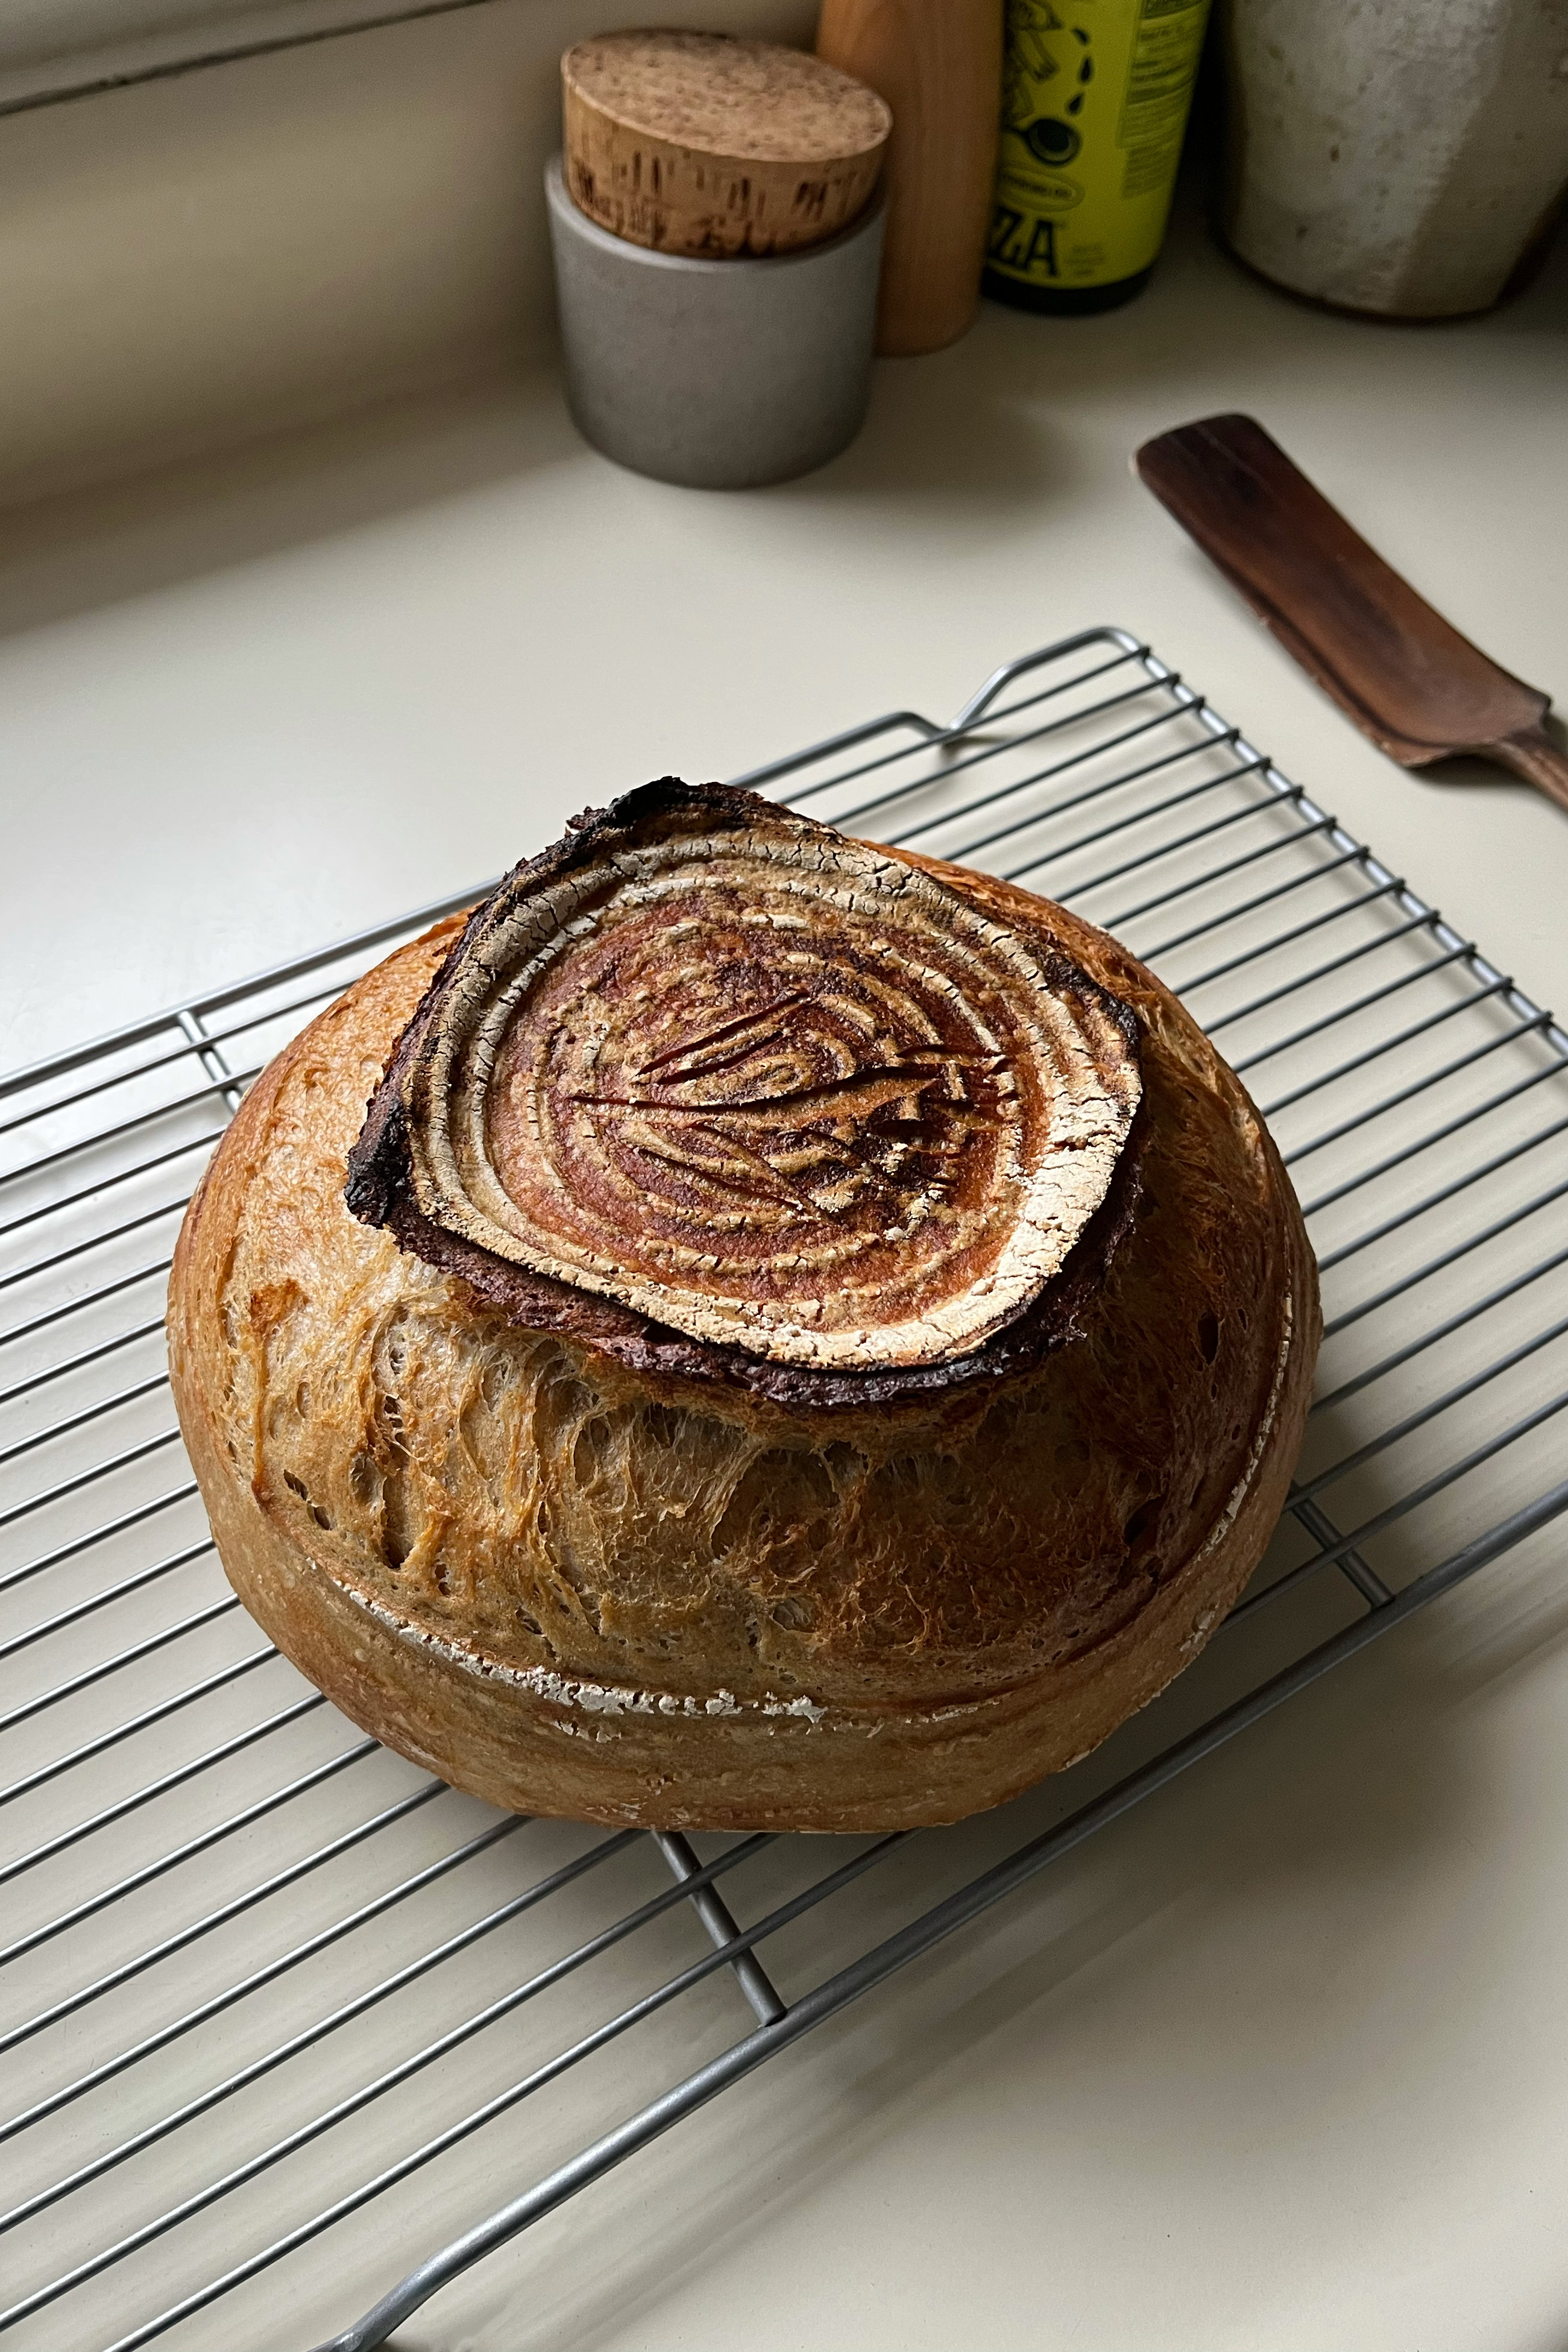 Sourdough bread without dutch oven and banneton basket (Baking in